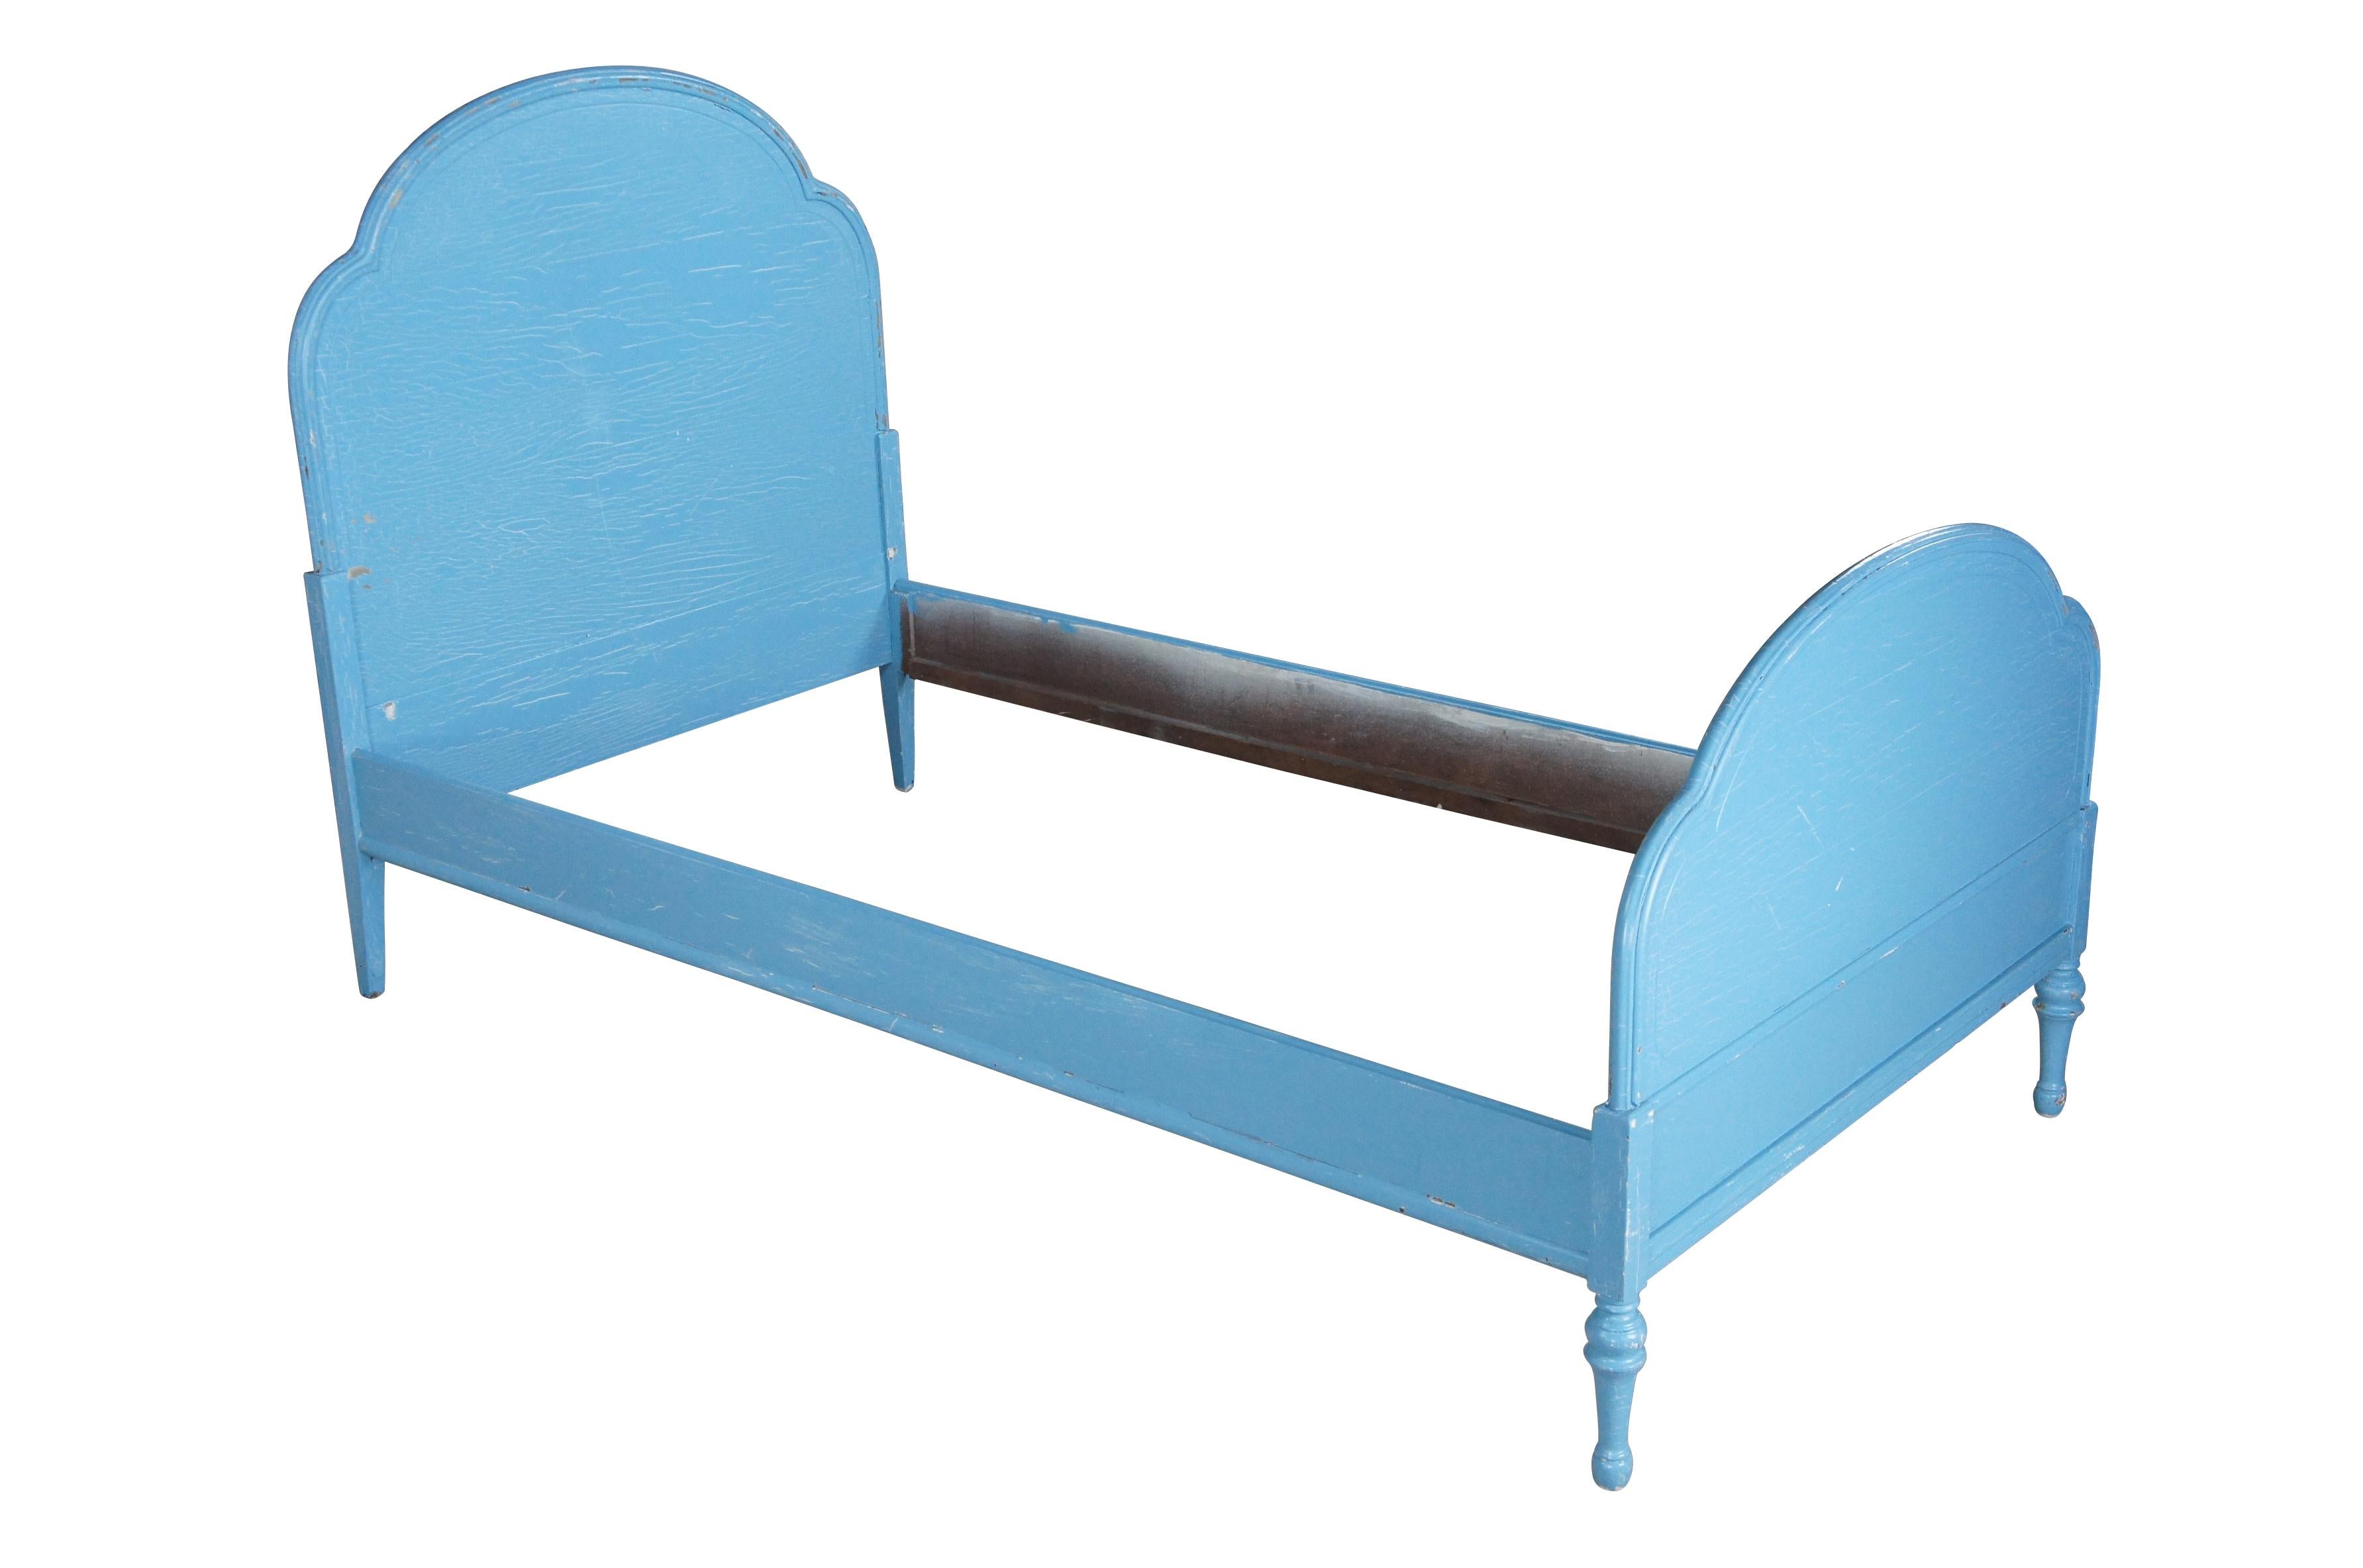 2 Antique Georgian style beds by Berkey & Gay, circa 1920.  Made from walnut with a blue painted crackle finish.  Reminiscent of clouds.  

A Brief History of Berkey & Gay Furniture Company
In 1855, William Berkey arrived in Grand Rapids and founded